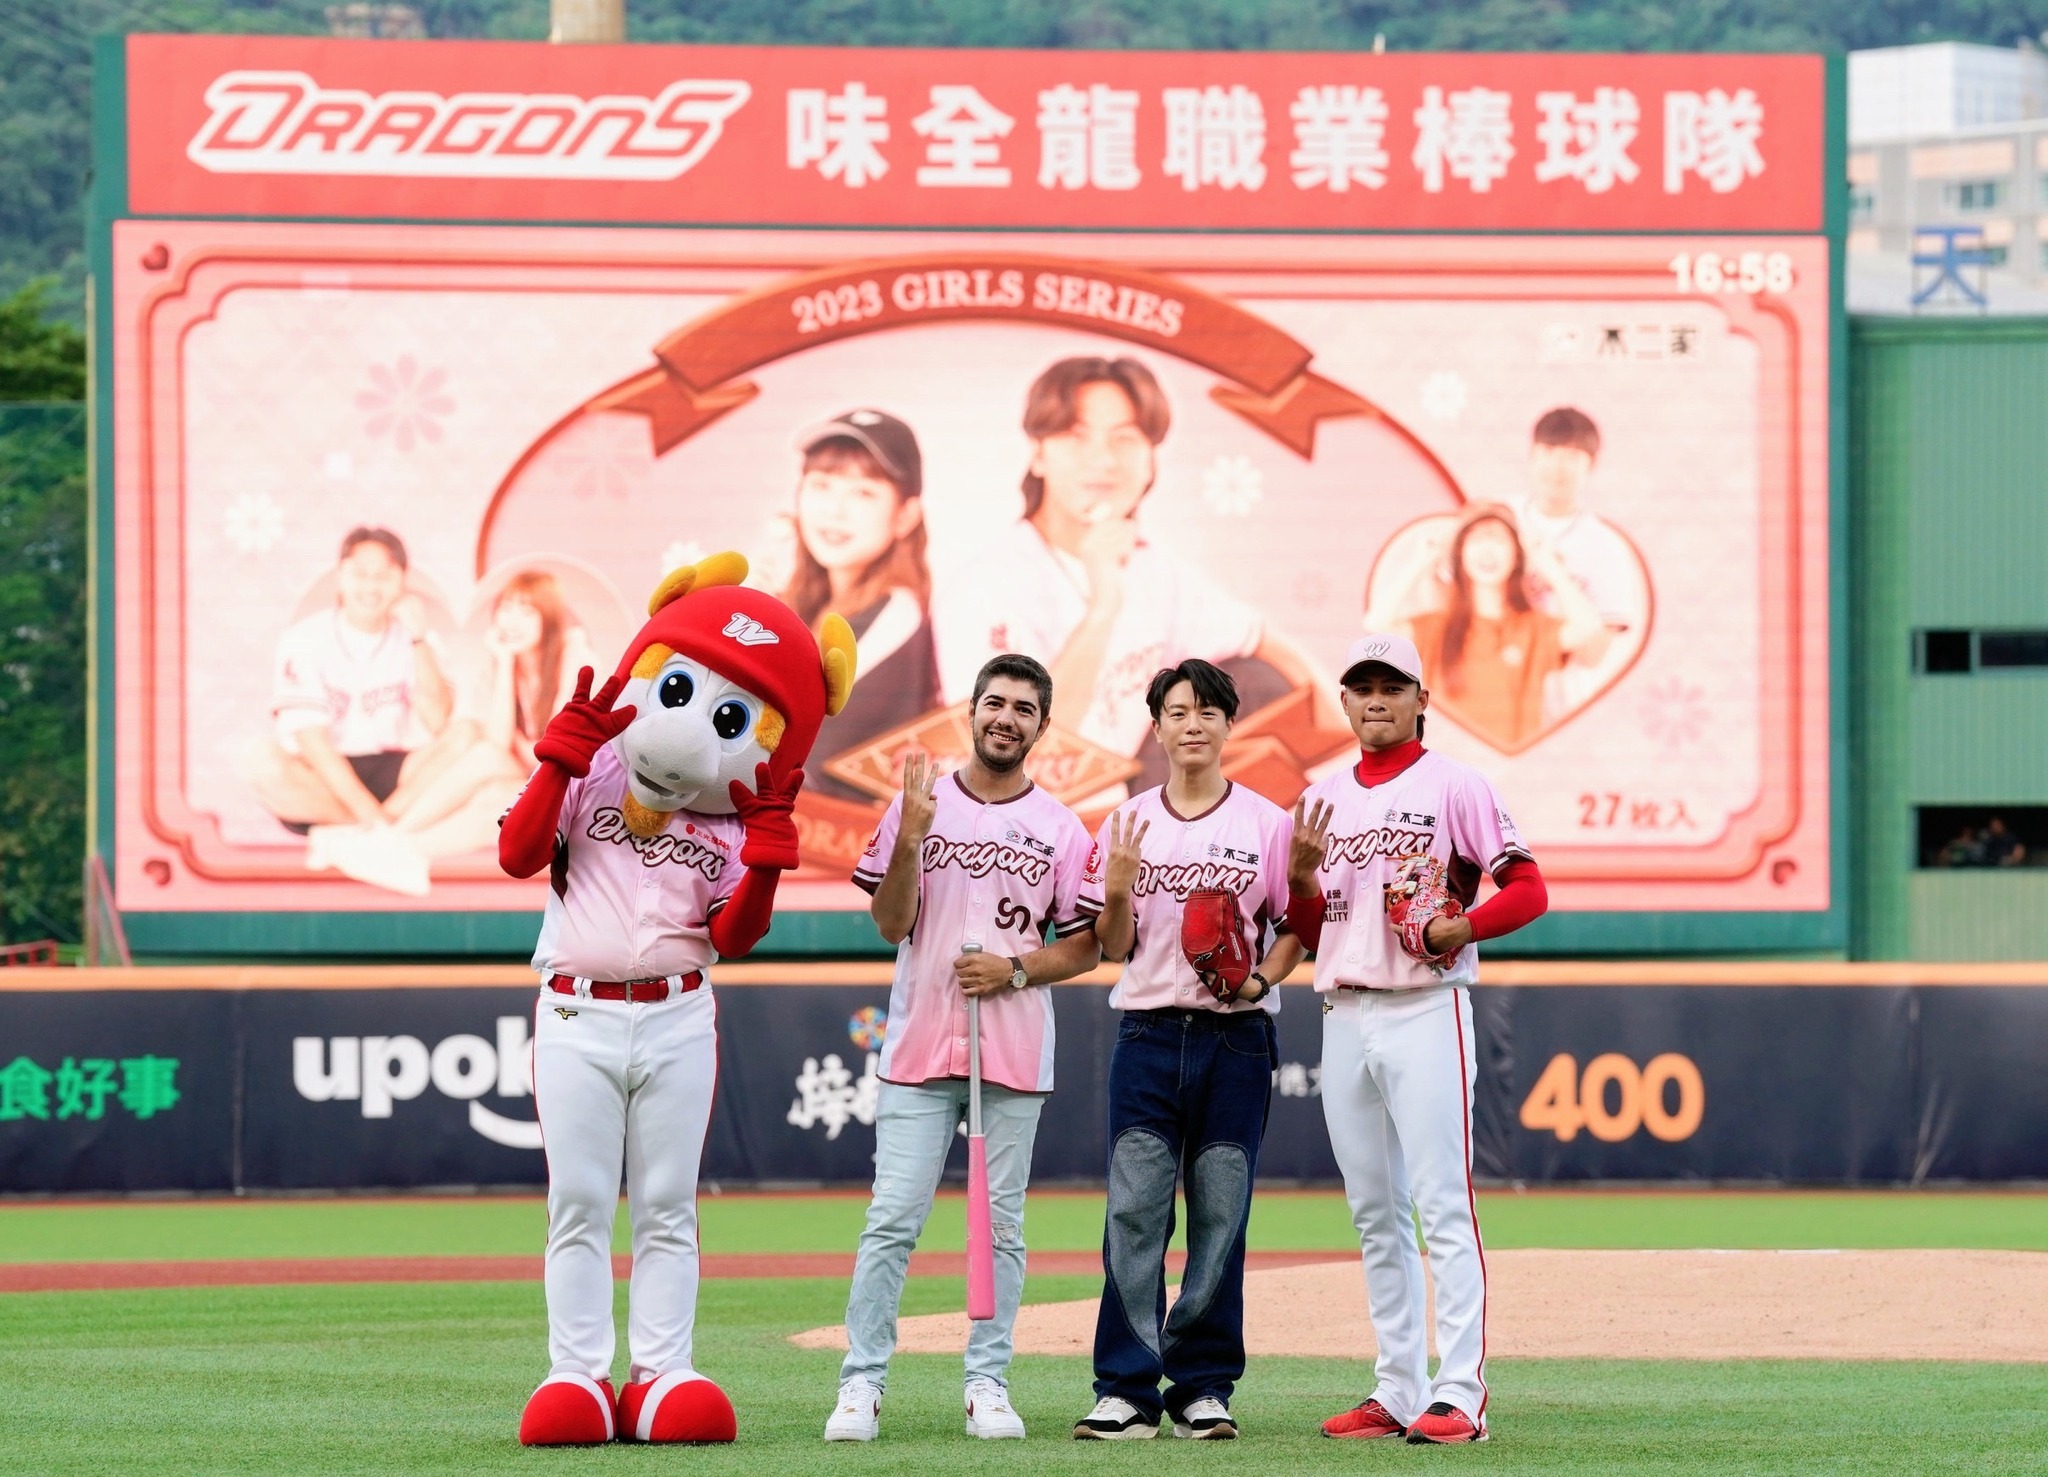 William Wei Li An, a musician, and Turkish new immigrant (圖佳) were recently invited as opening guests by the WeiChuan Dragons, a professional baseball team, at Tianmu's home game.  Photo reproduce from WeiChuan Dragons Facebook